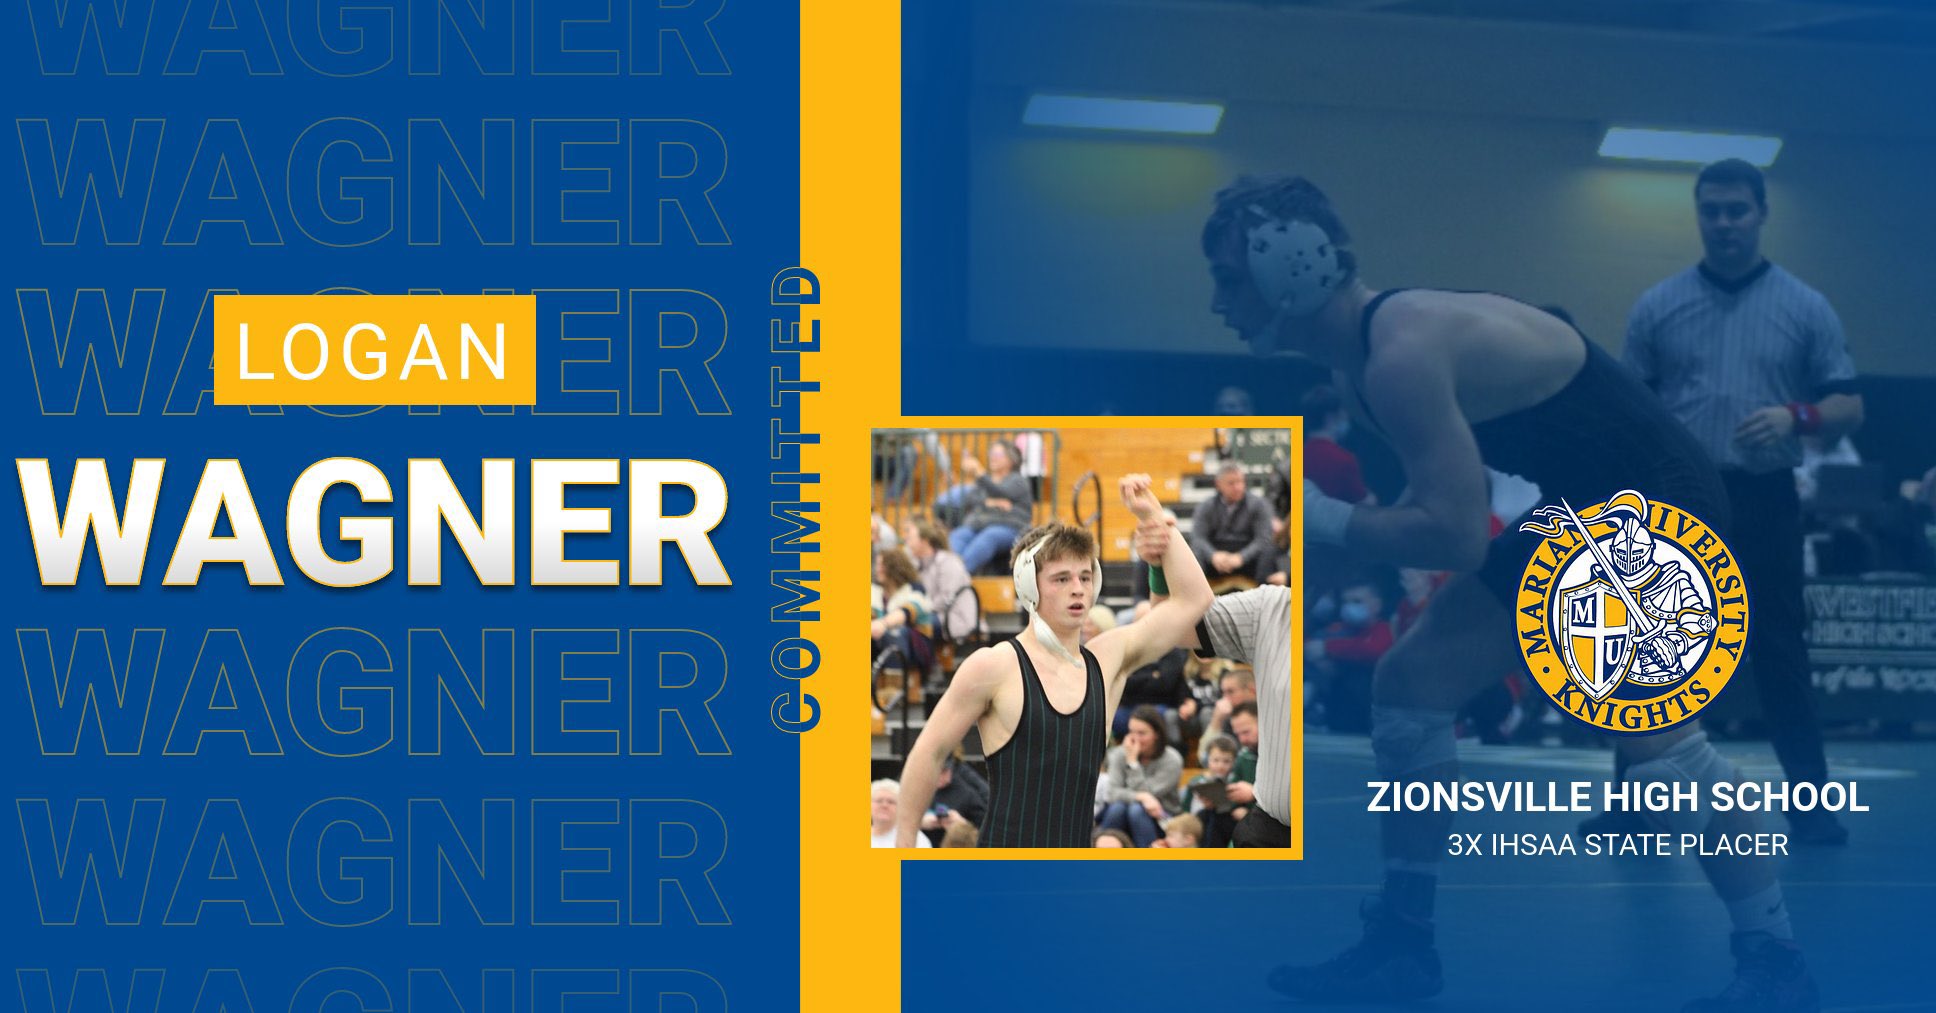 More information about "Logan Wagner of Zionsville"